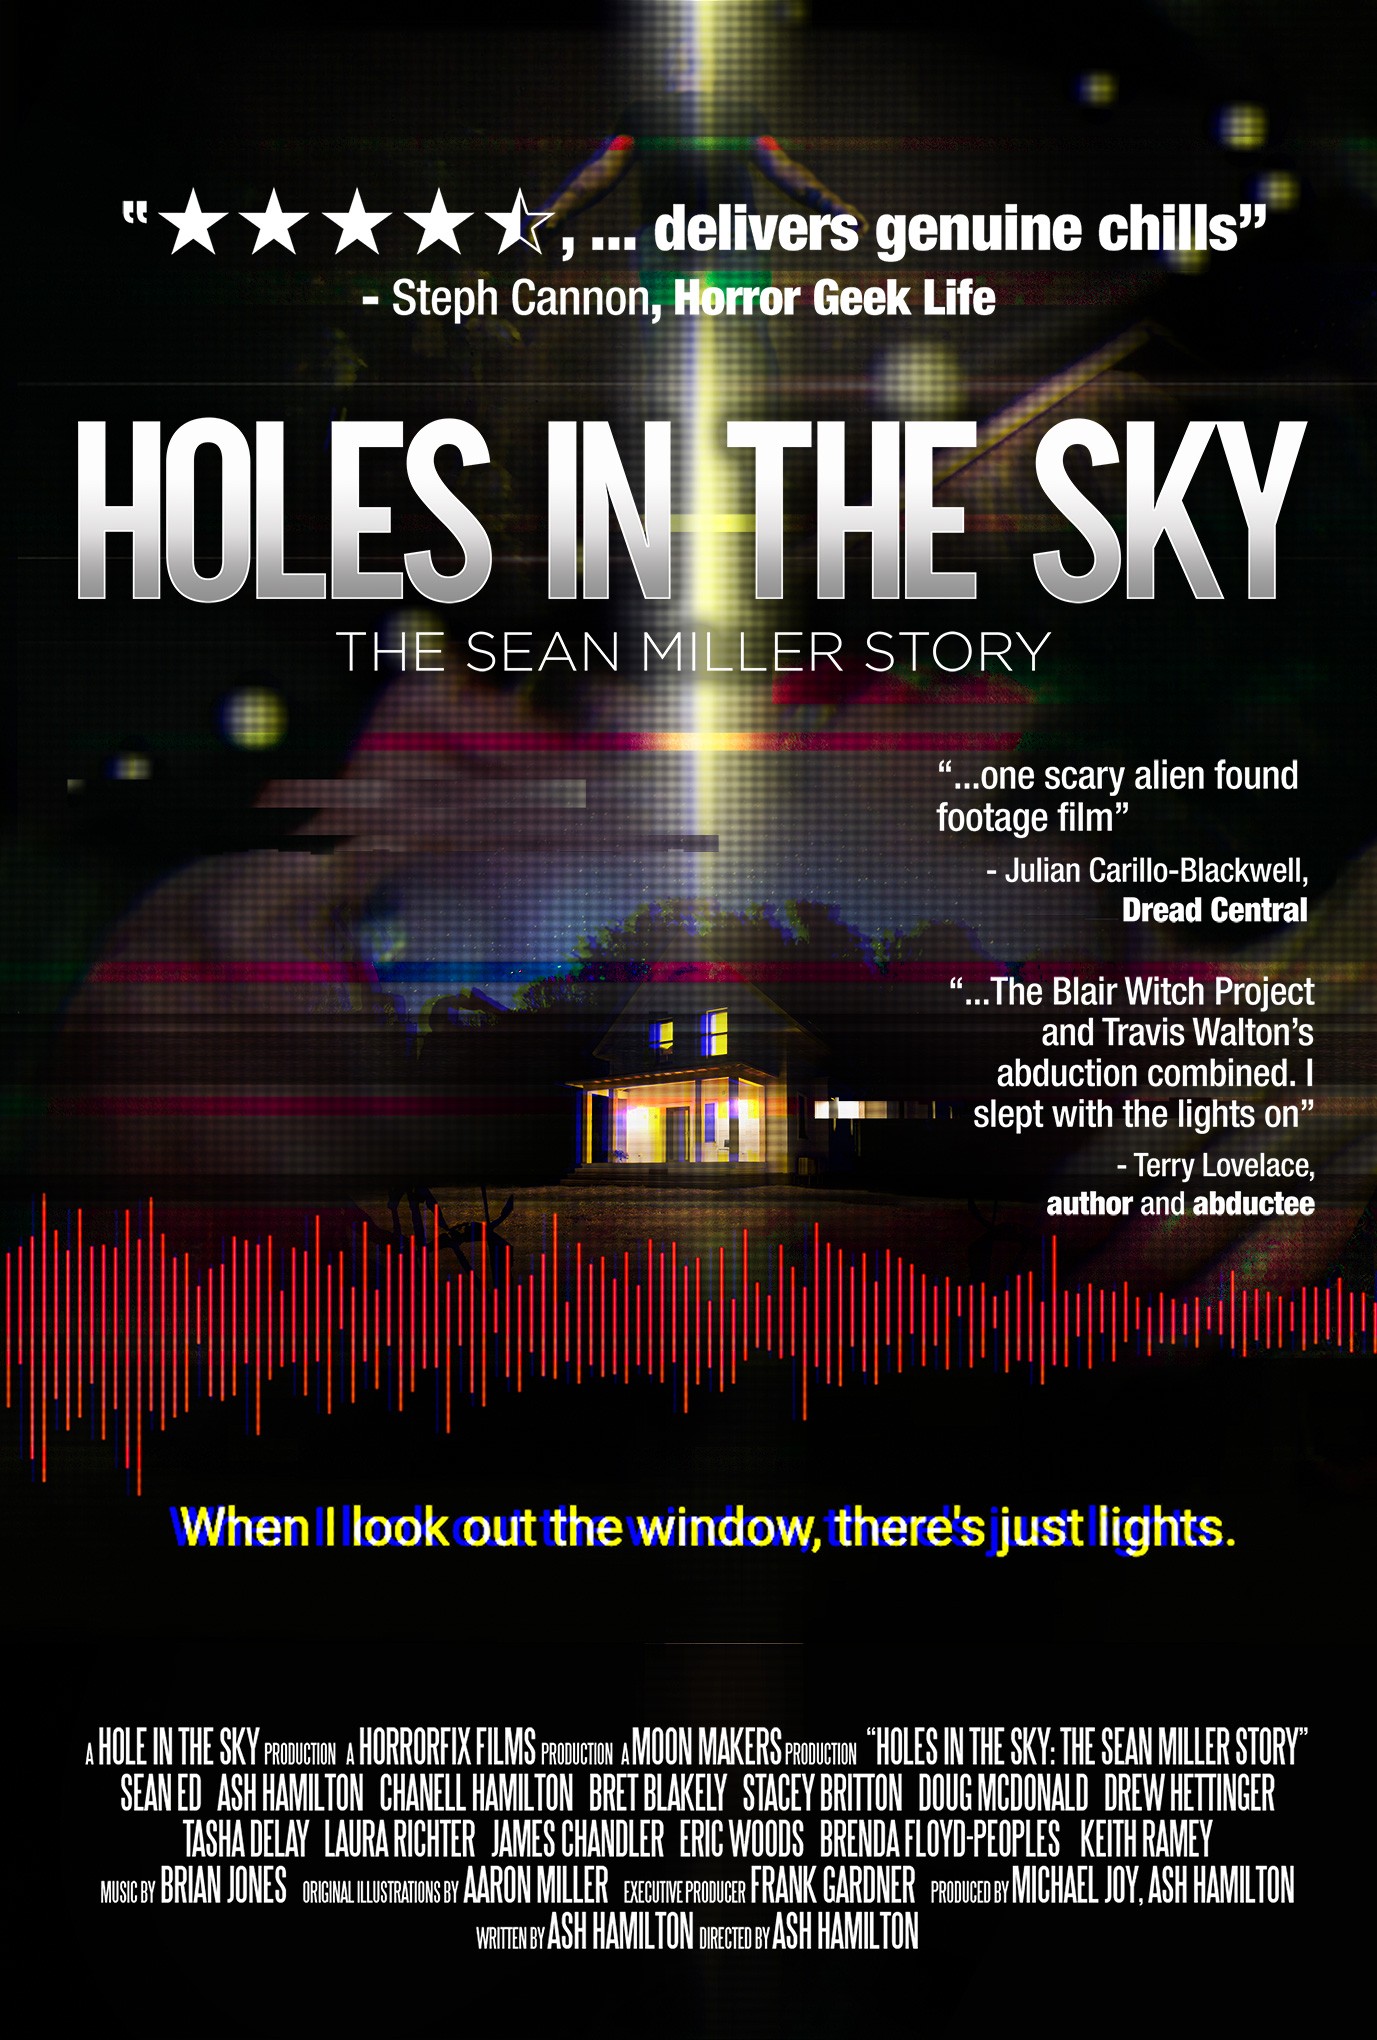 Holes in the Sky: The Sean Miller Story beats The Blair Witch Project for Most Awards Won for a Found Footage Film